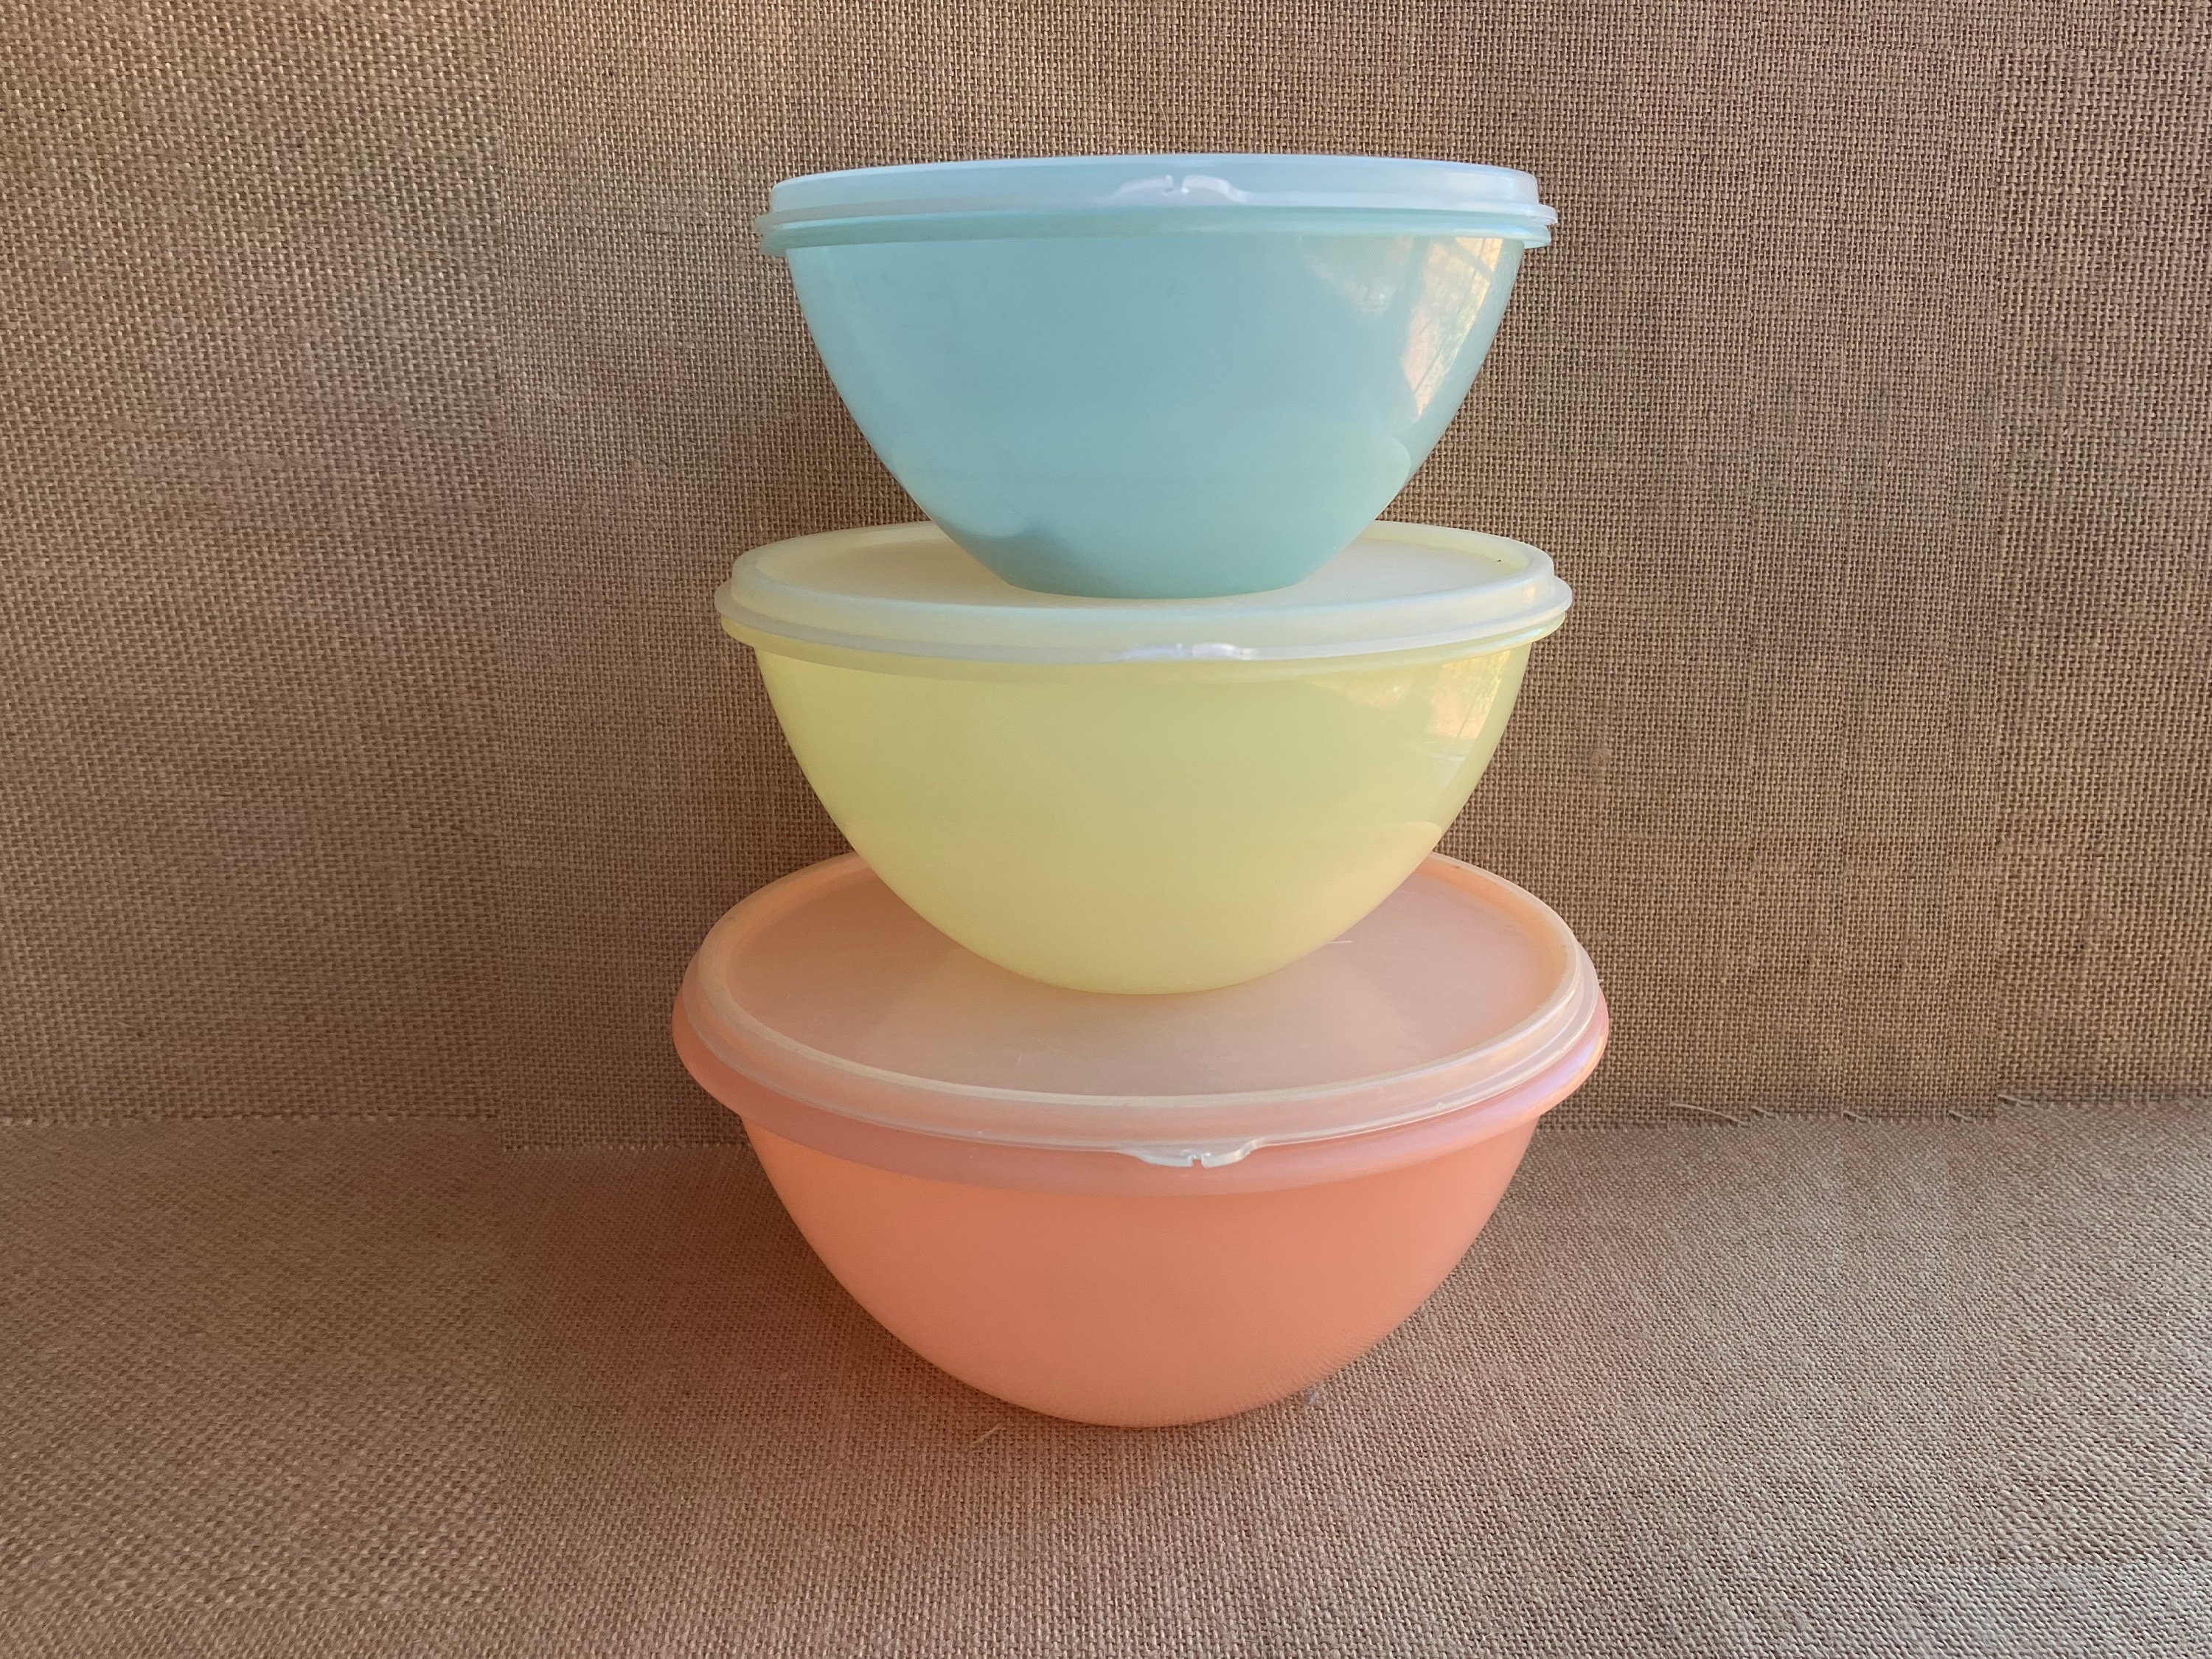 1996 TUPPERWARE 50th Anniversary Gold Wonderlier Bowl #234 with Lid/Seal  #2541